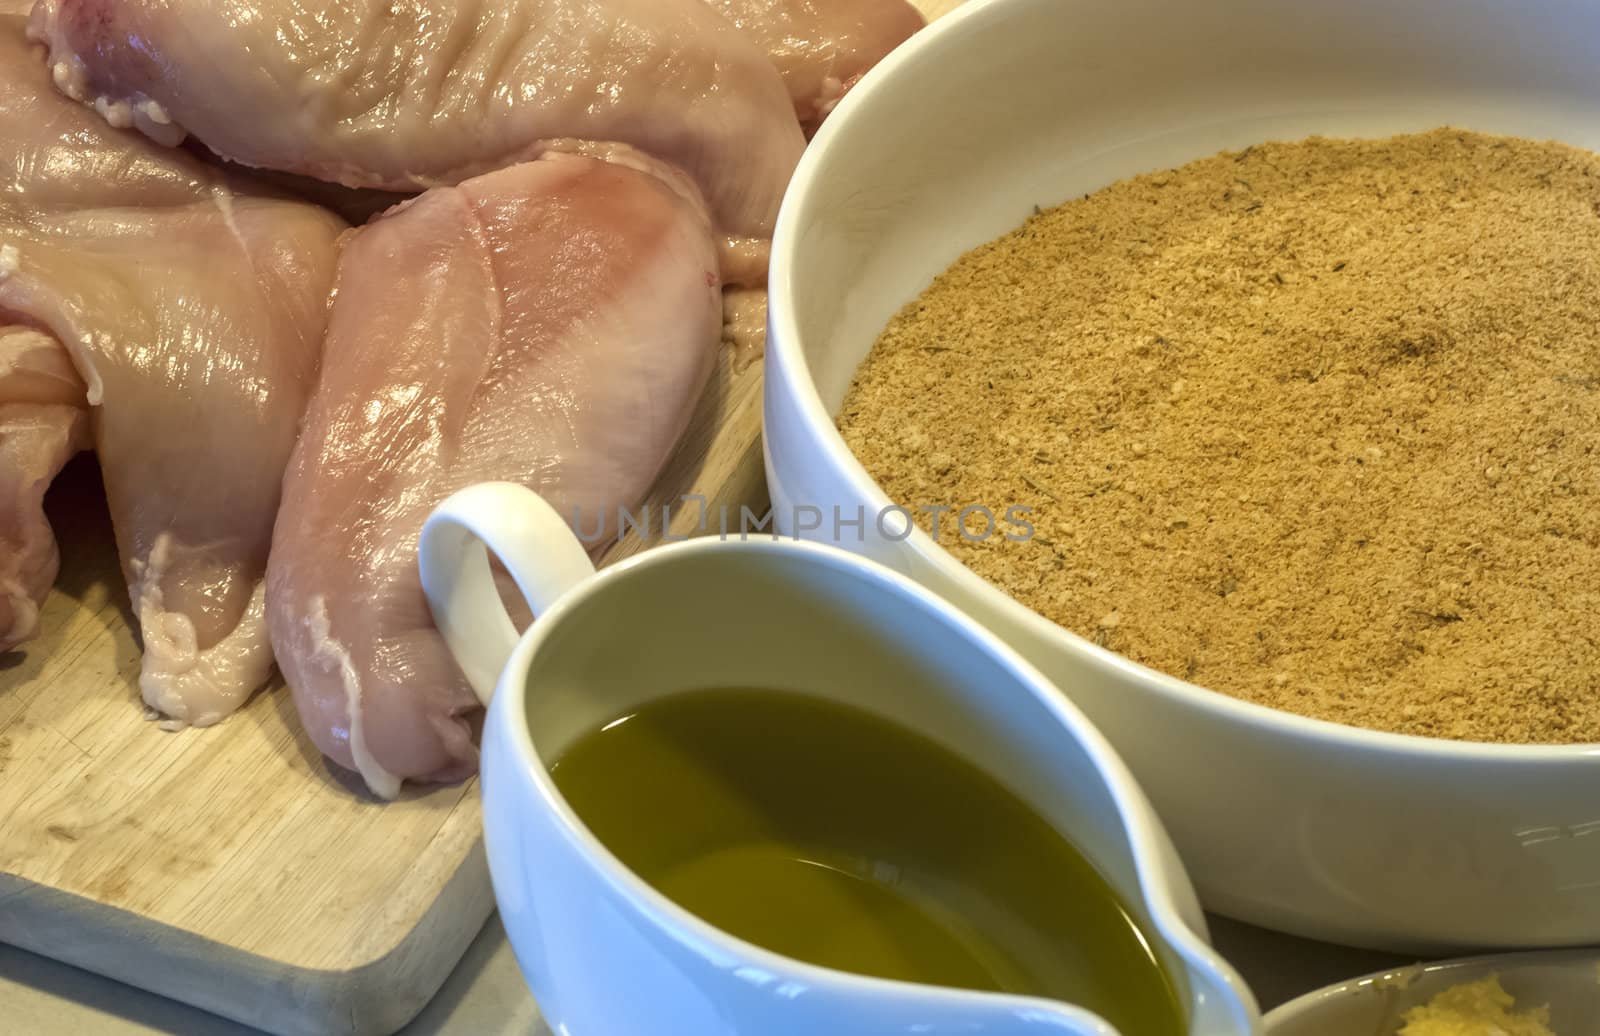 Ingredients for the preparation of breaded fried chicken